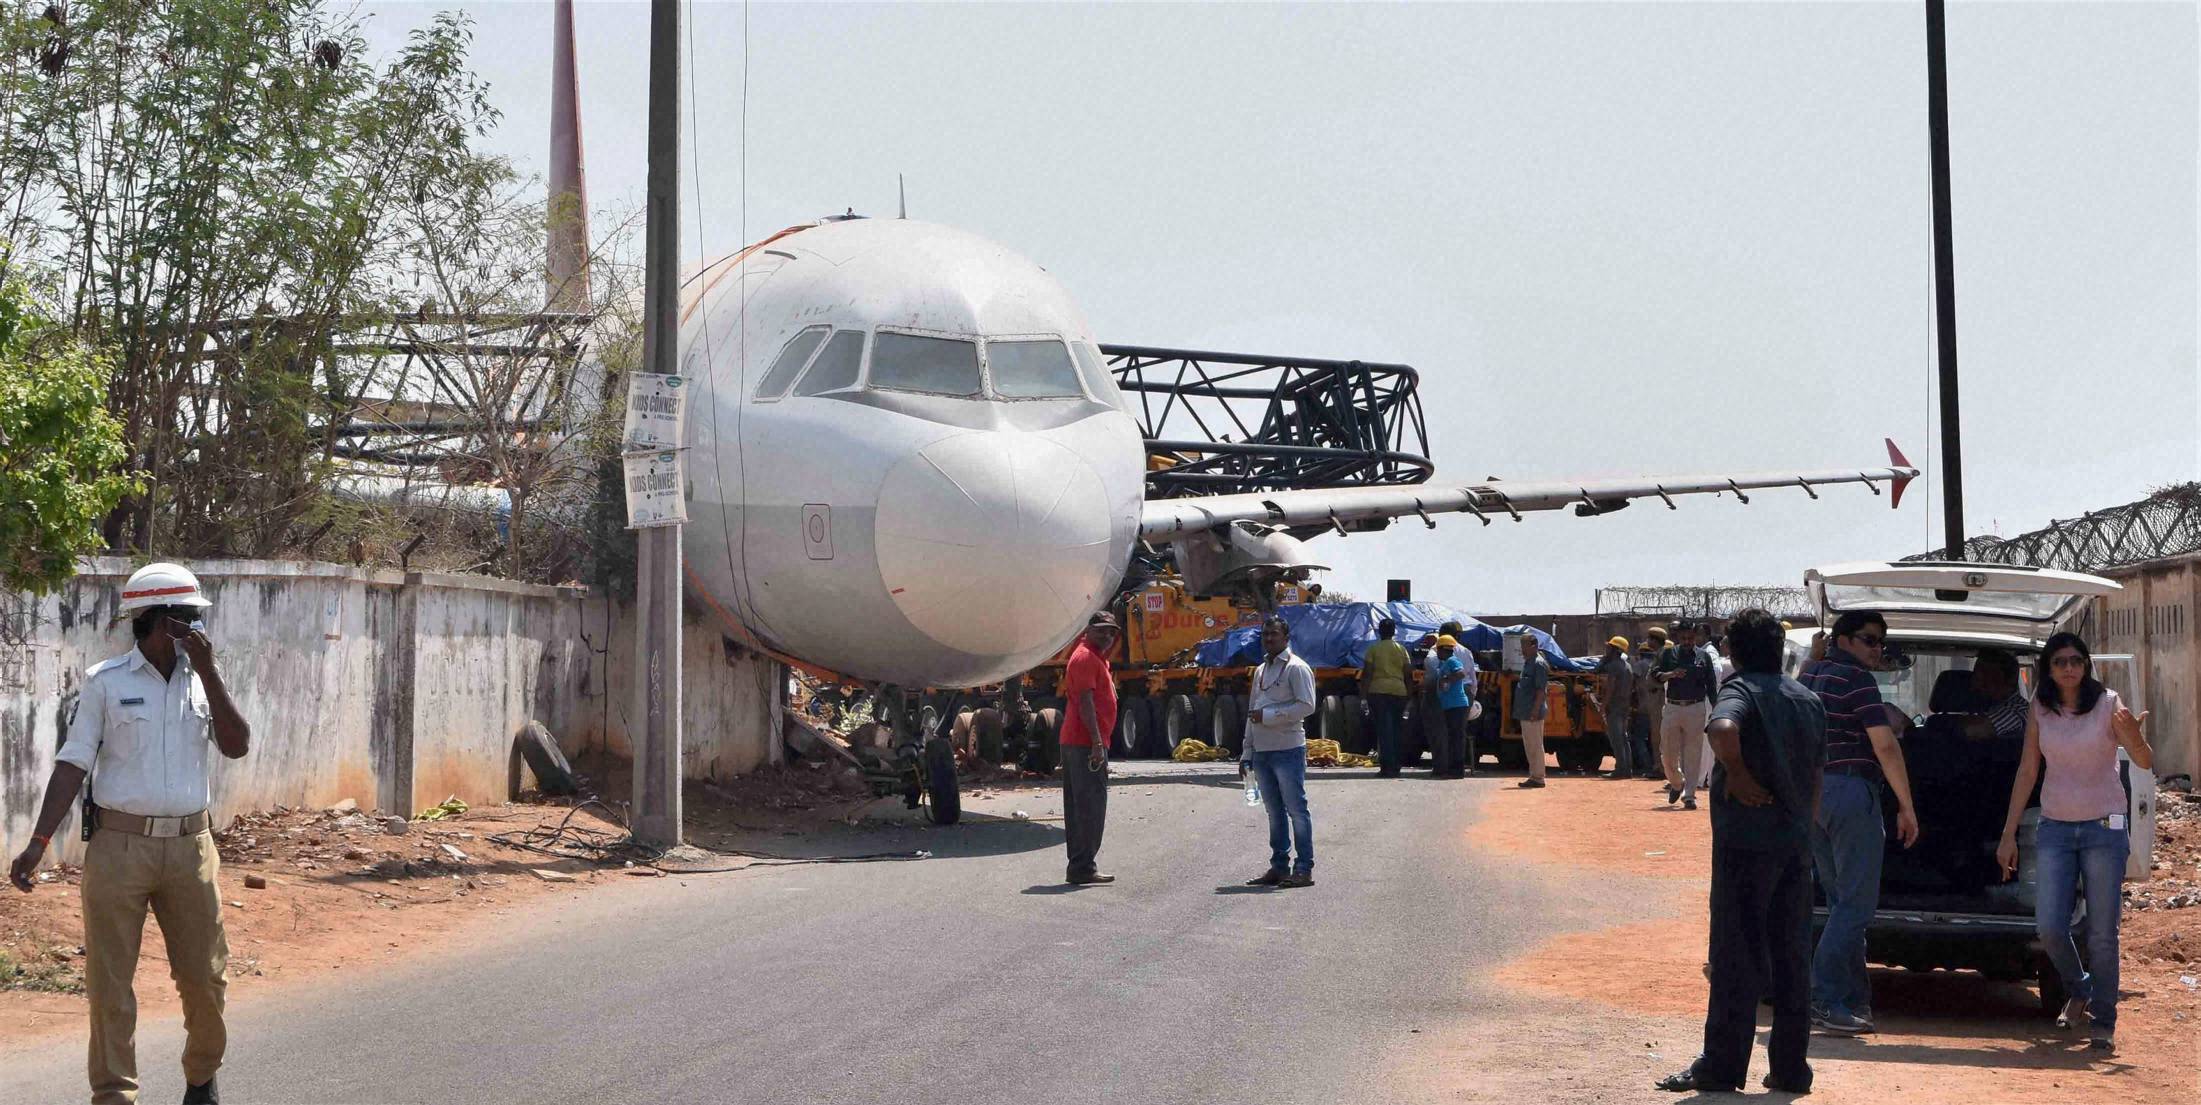 Unused Air India aircraft collapses during road transport